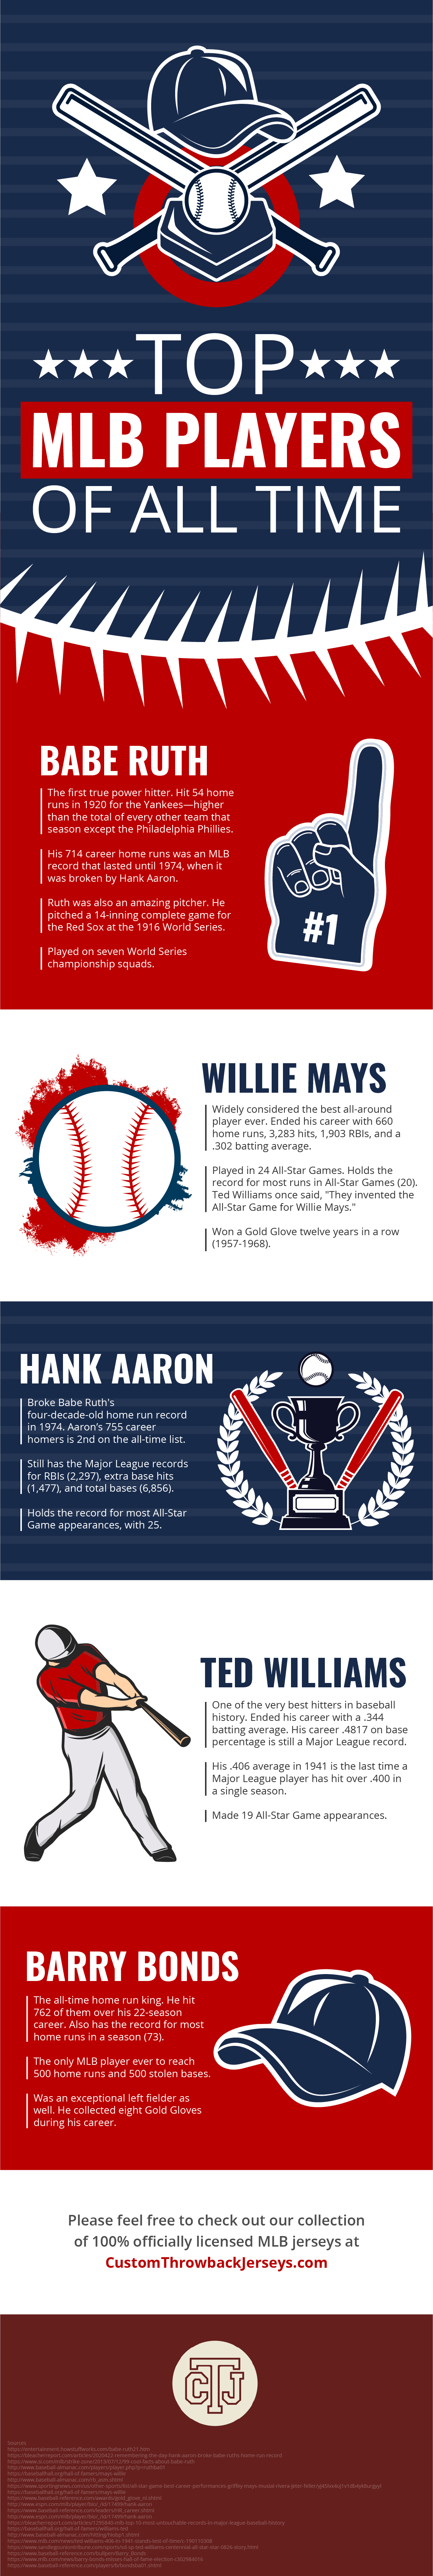 The Greatest MLB Baseball Players of All Time